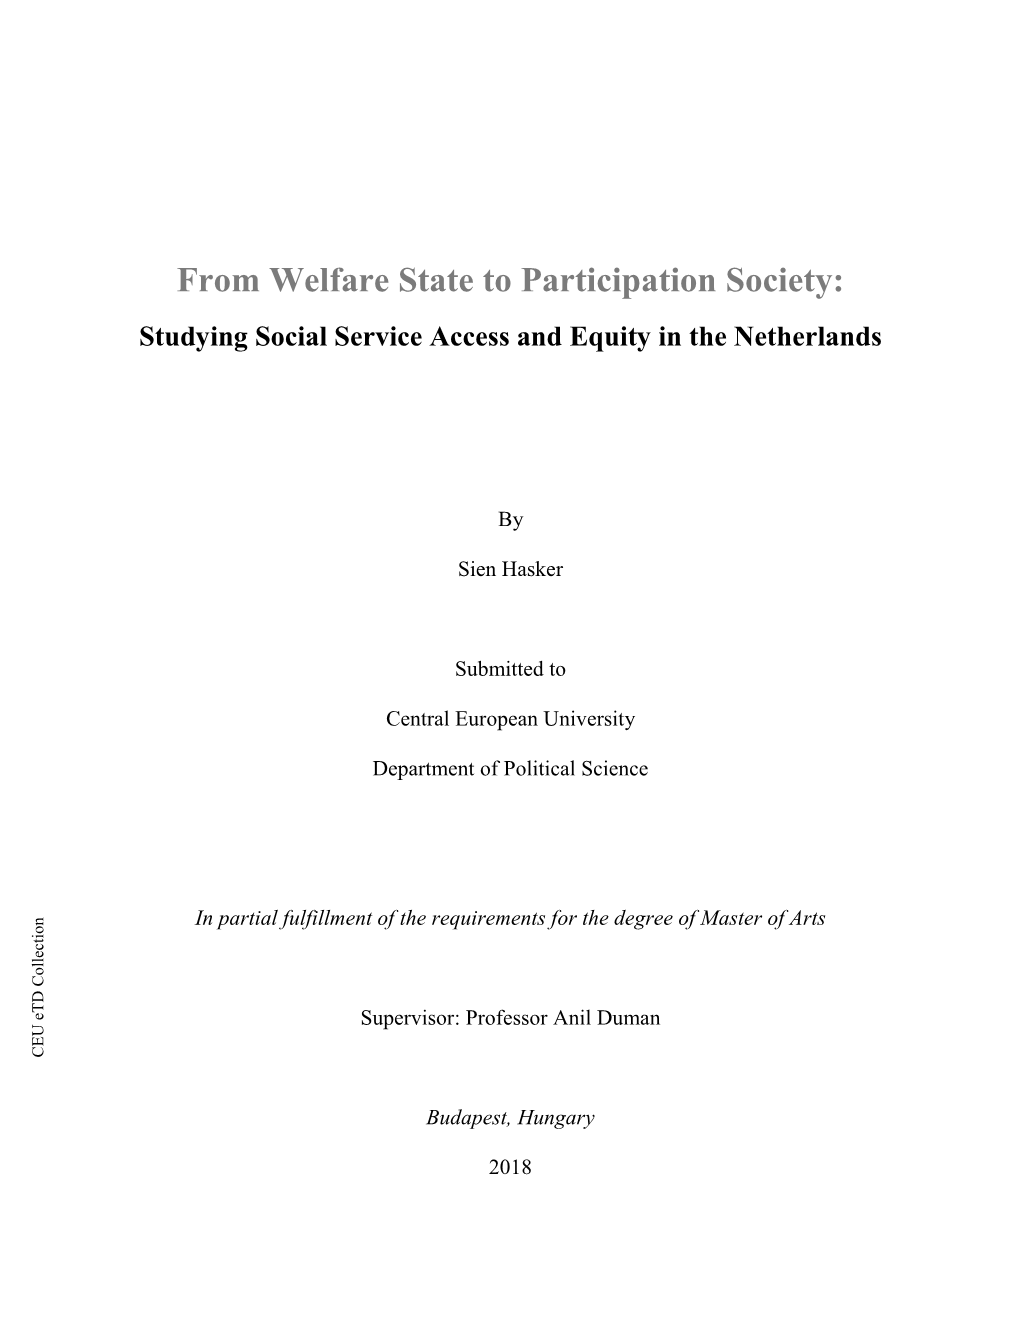 From Welfare State to Participation Society: Studying Social Service Access and Equity in the Netherlands